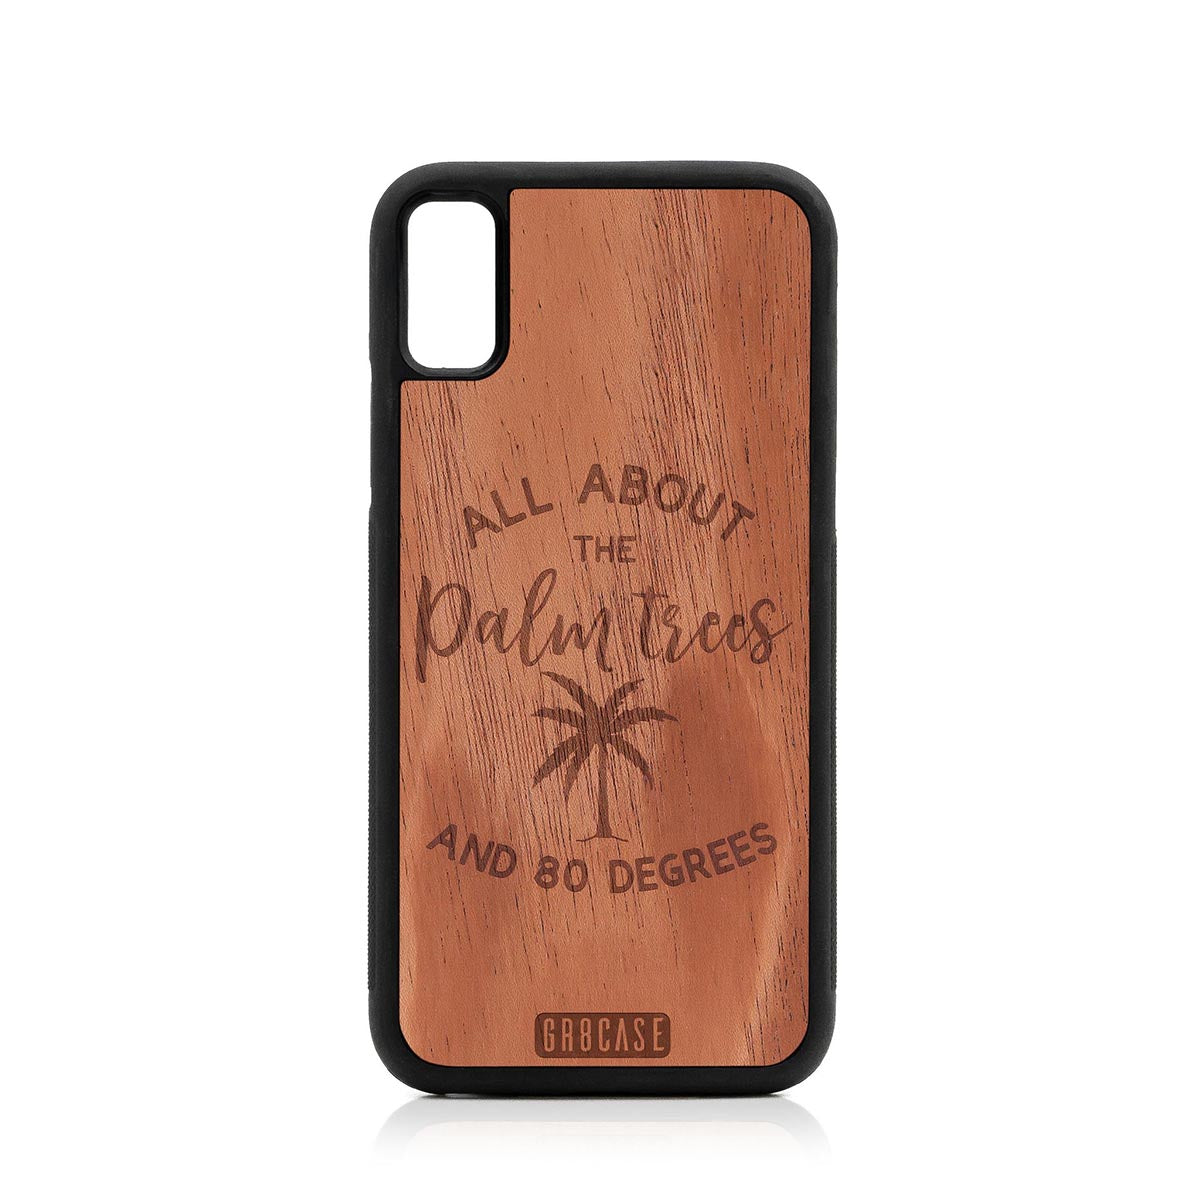 All About The Palm Trees and 80 Degrees Design Wood Case For iPhone XR by GR8CASE